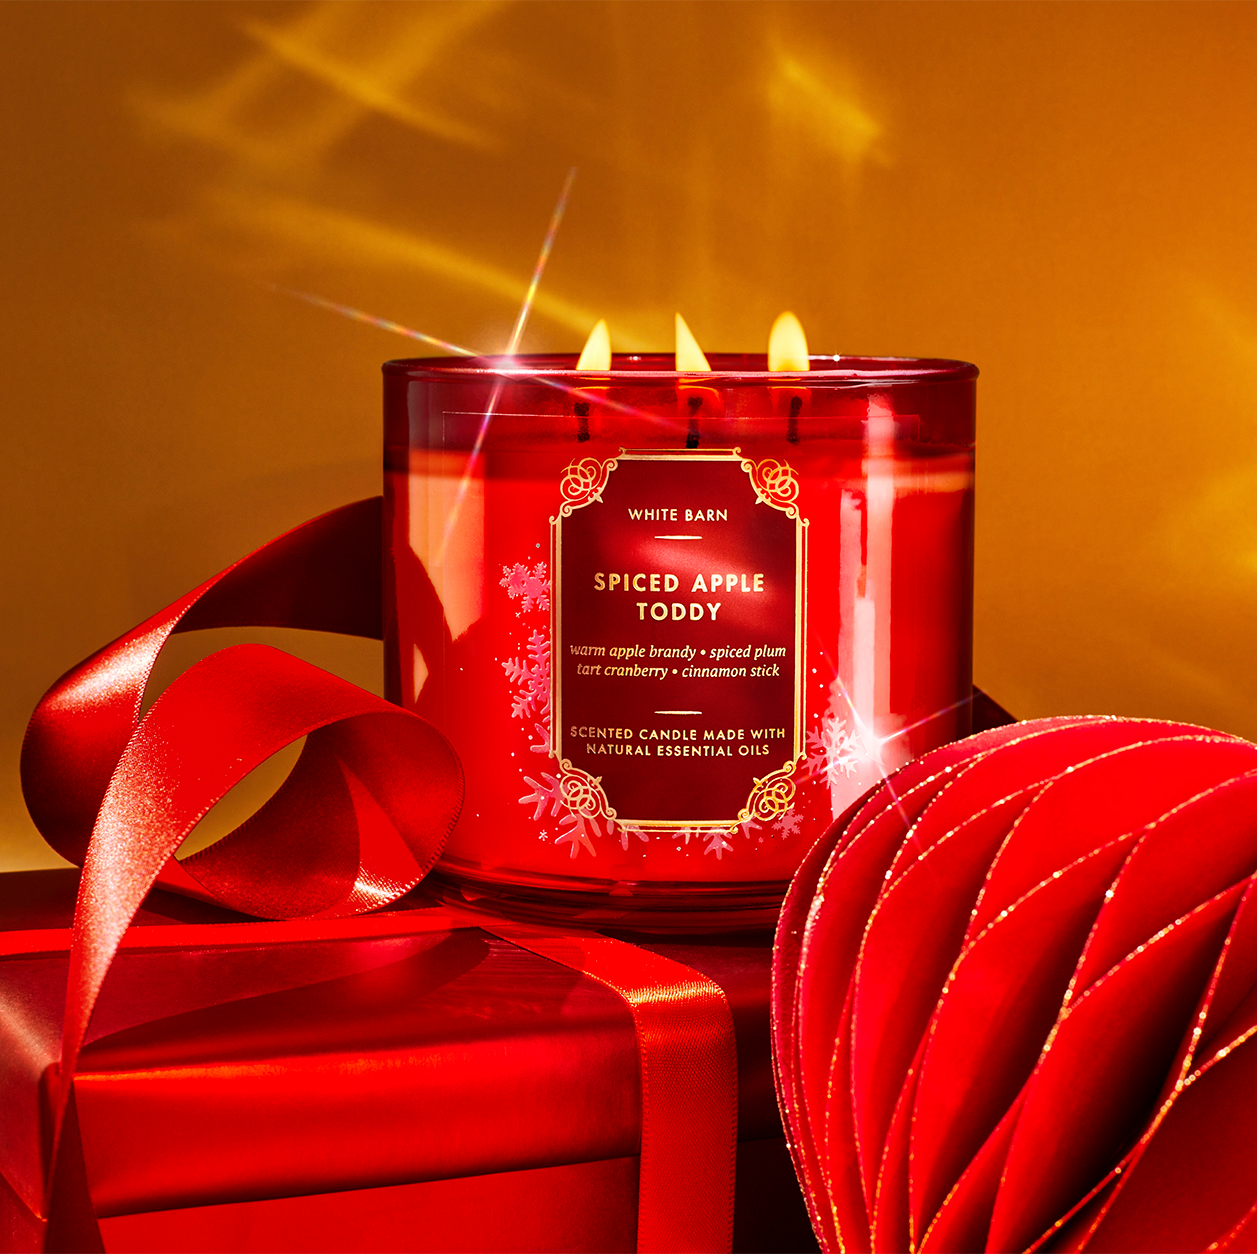 Alert: Bath & Body Works' $10 Candle Day Sale Has Arrived (and the Holiday Deals Are Too Good)